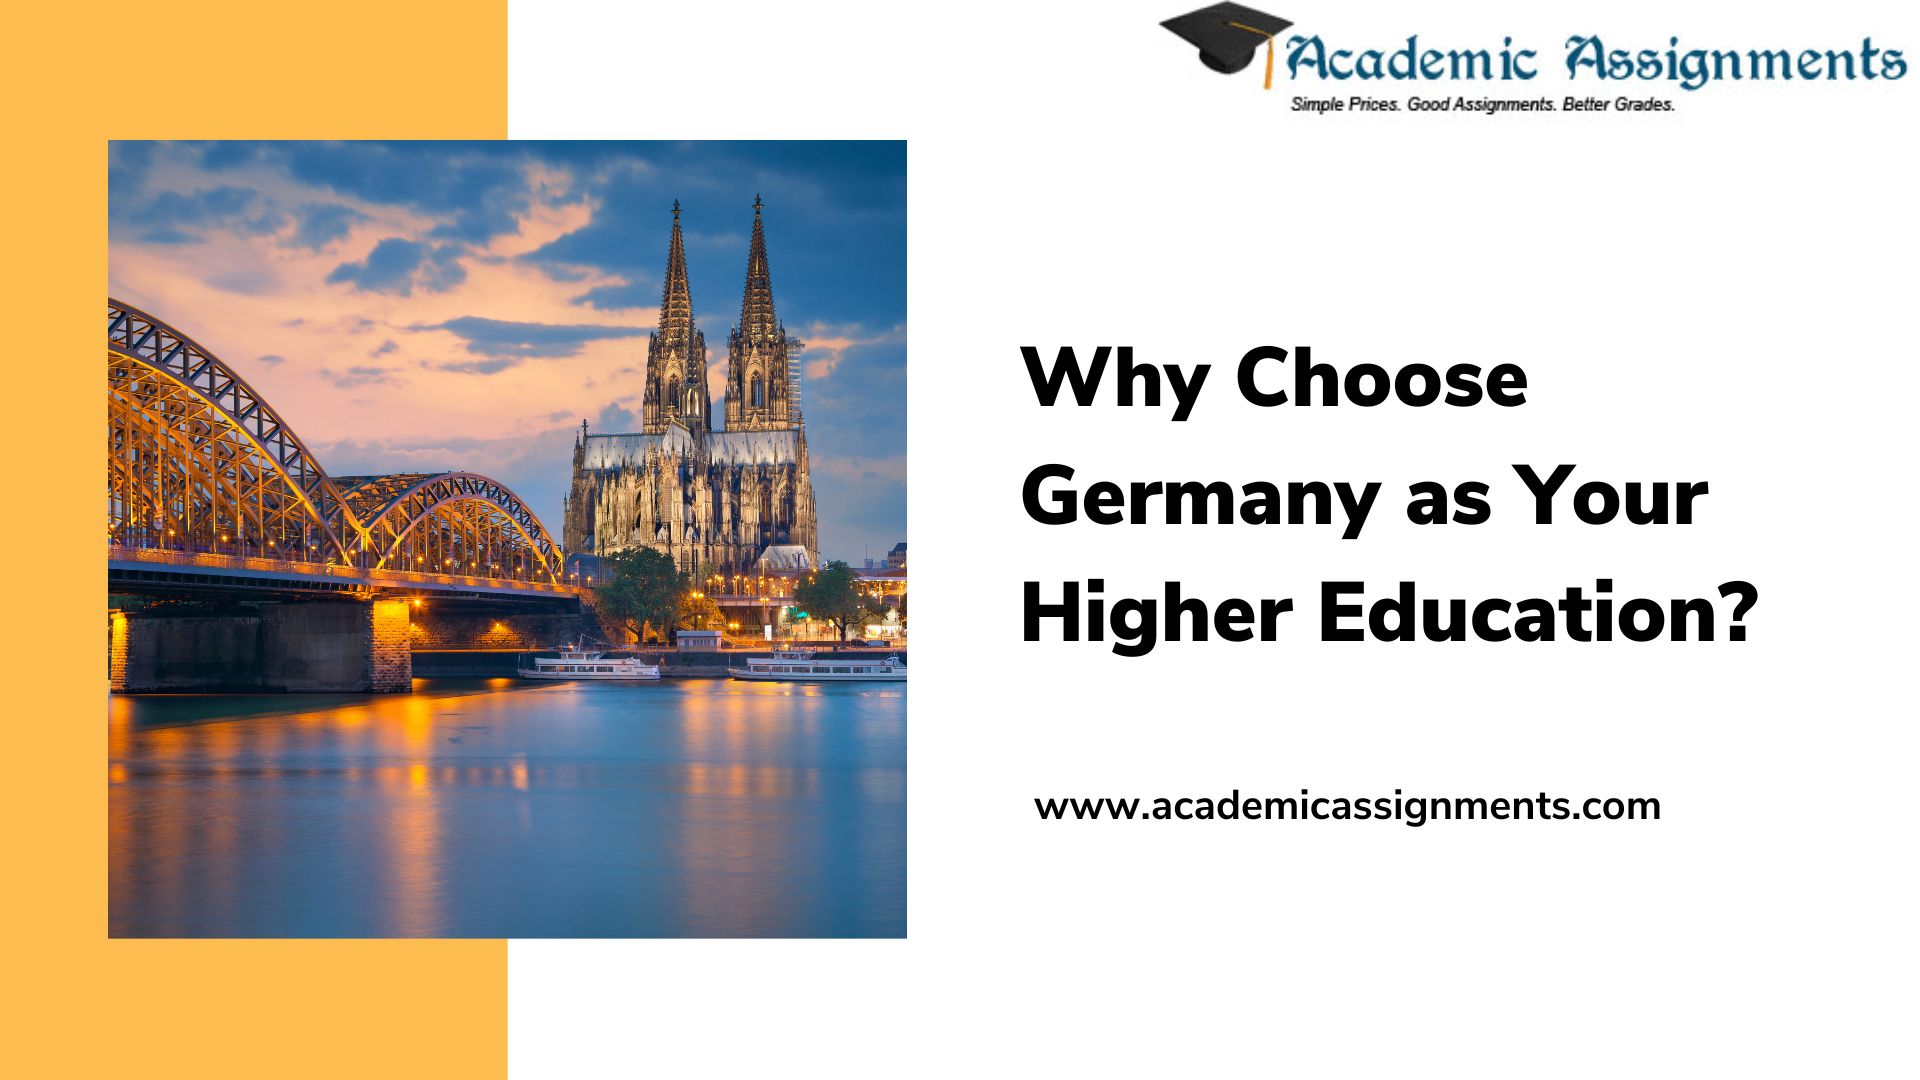 Why Choose Germany as Your Higher Education